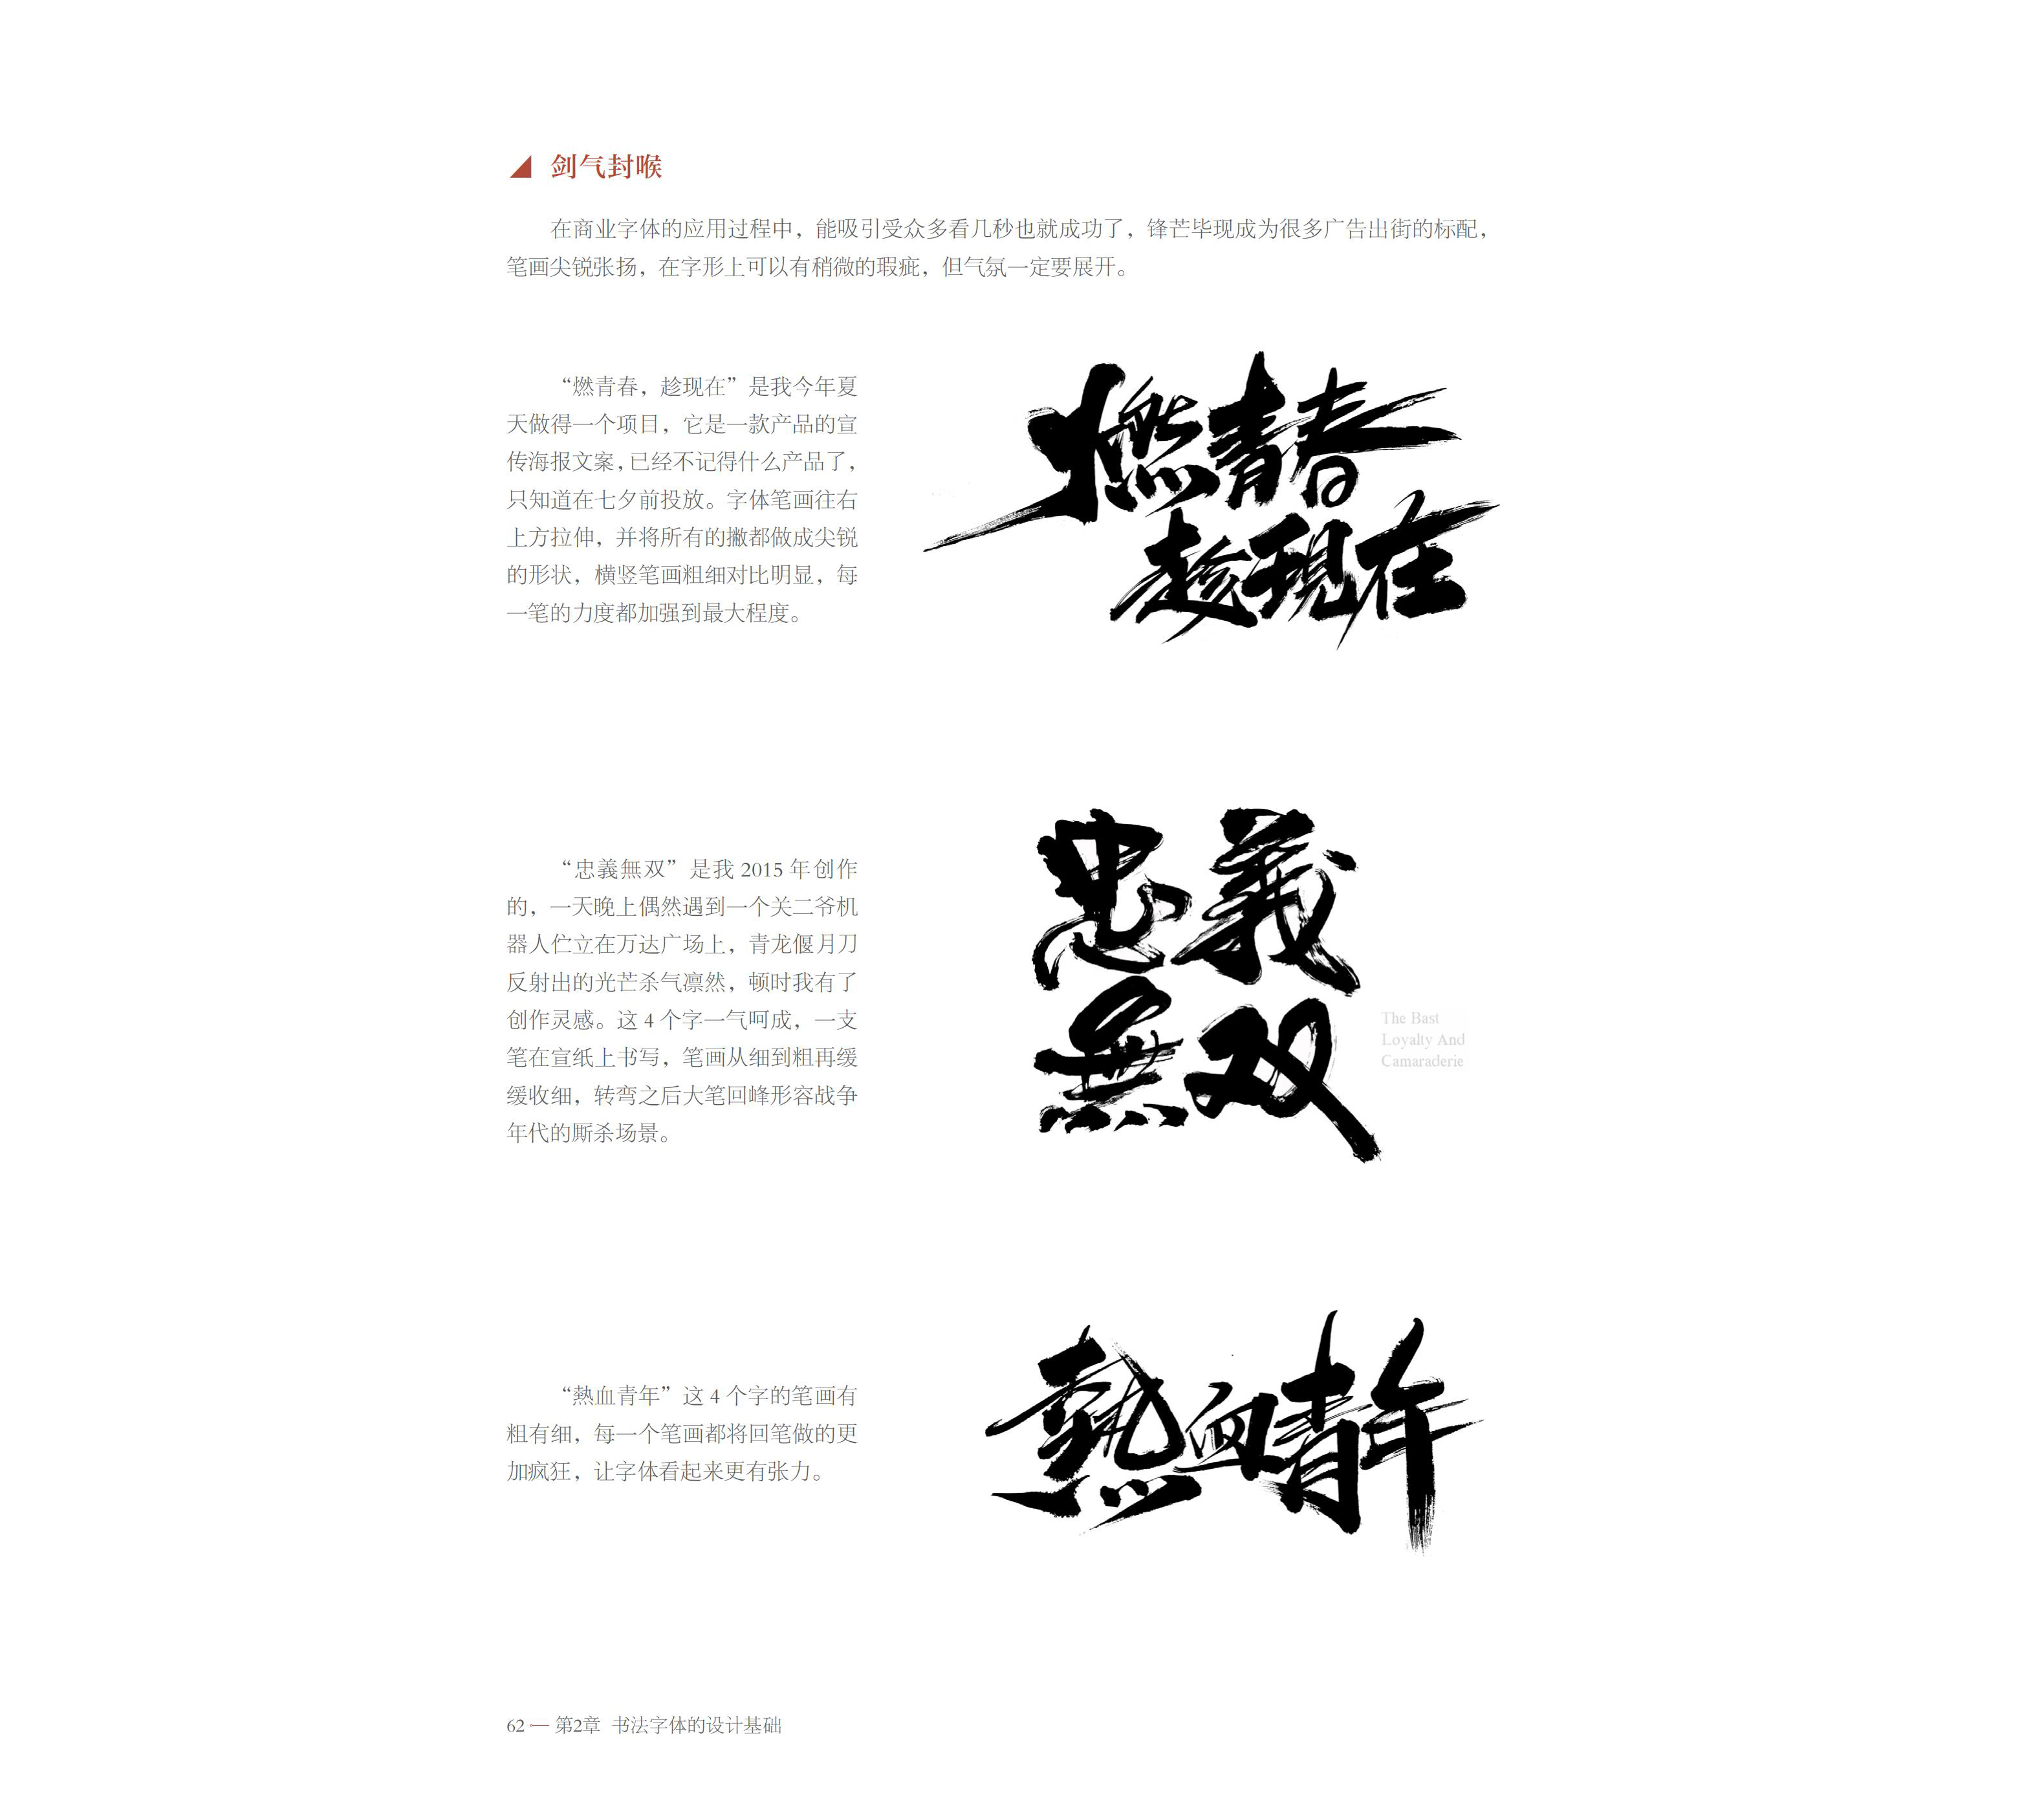 A font design that combines calligraphy with commerce.